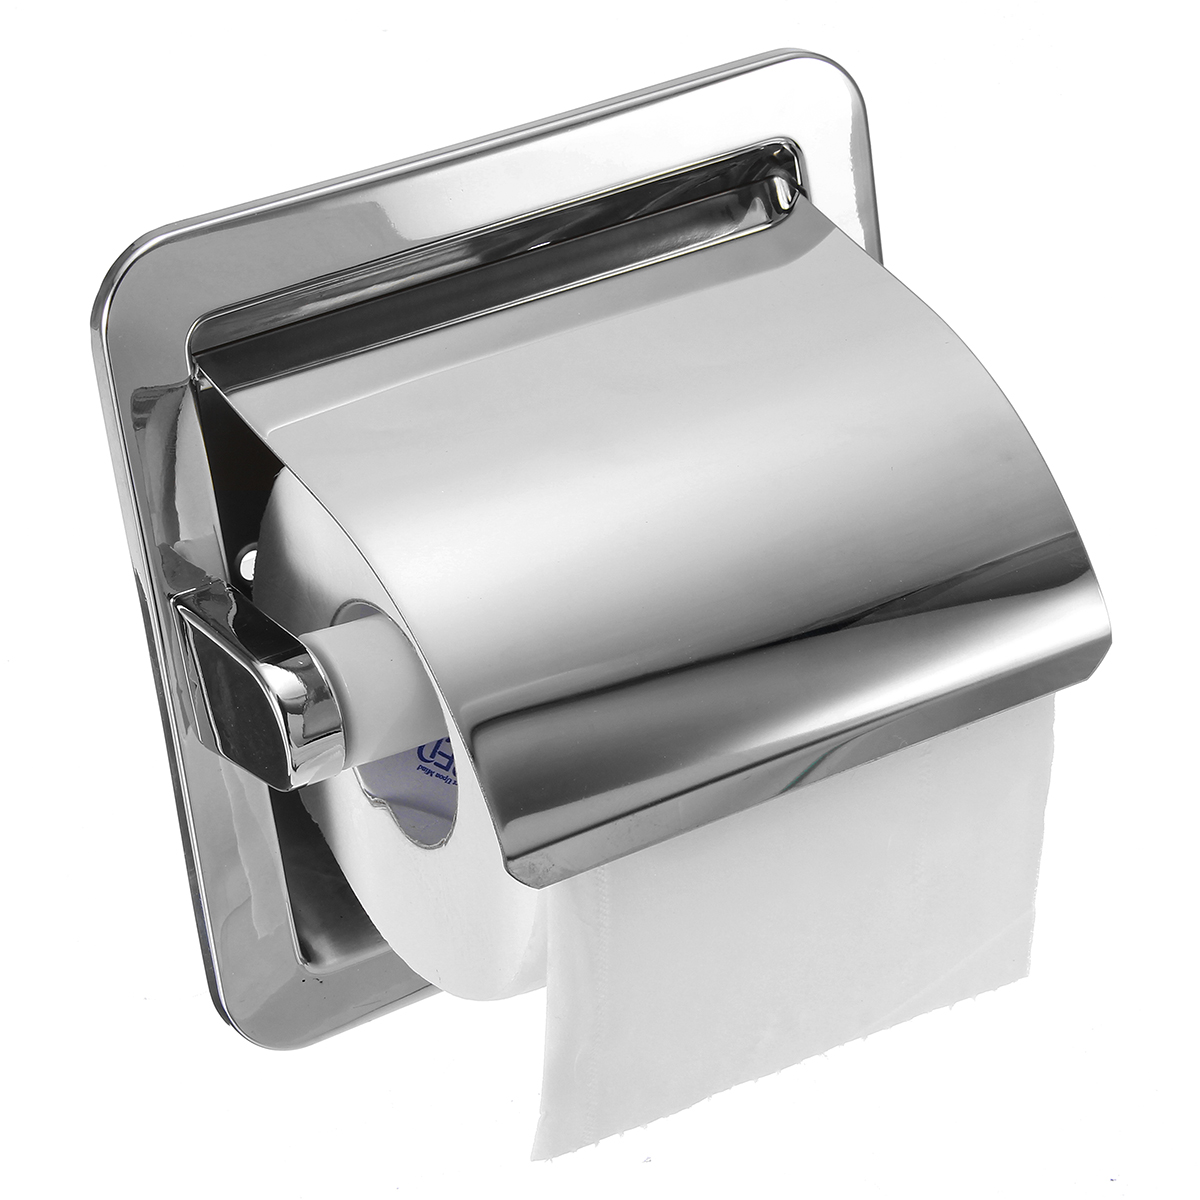 Recessed-Toilet-Paper-Roll-Holder-Tissue-Brushed-Nickel-Loaded-Stand-1210987